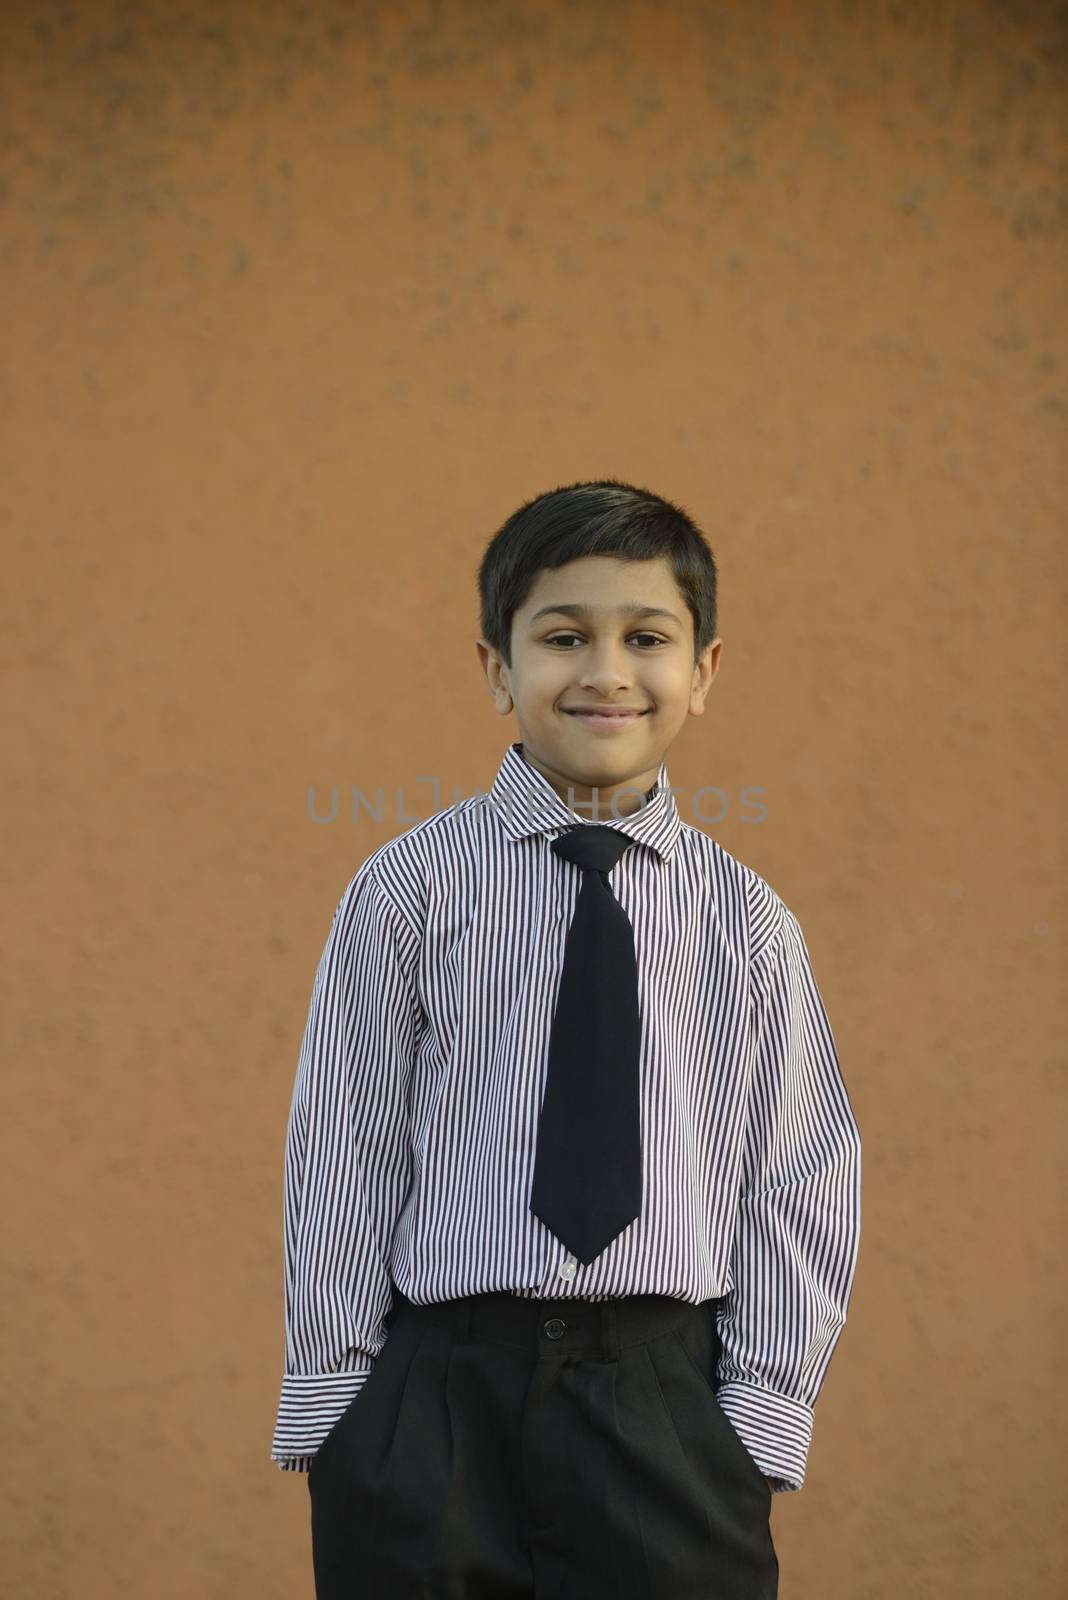 Handsome Indian toddler ready to go to school